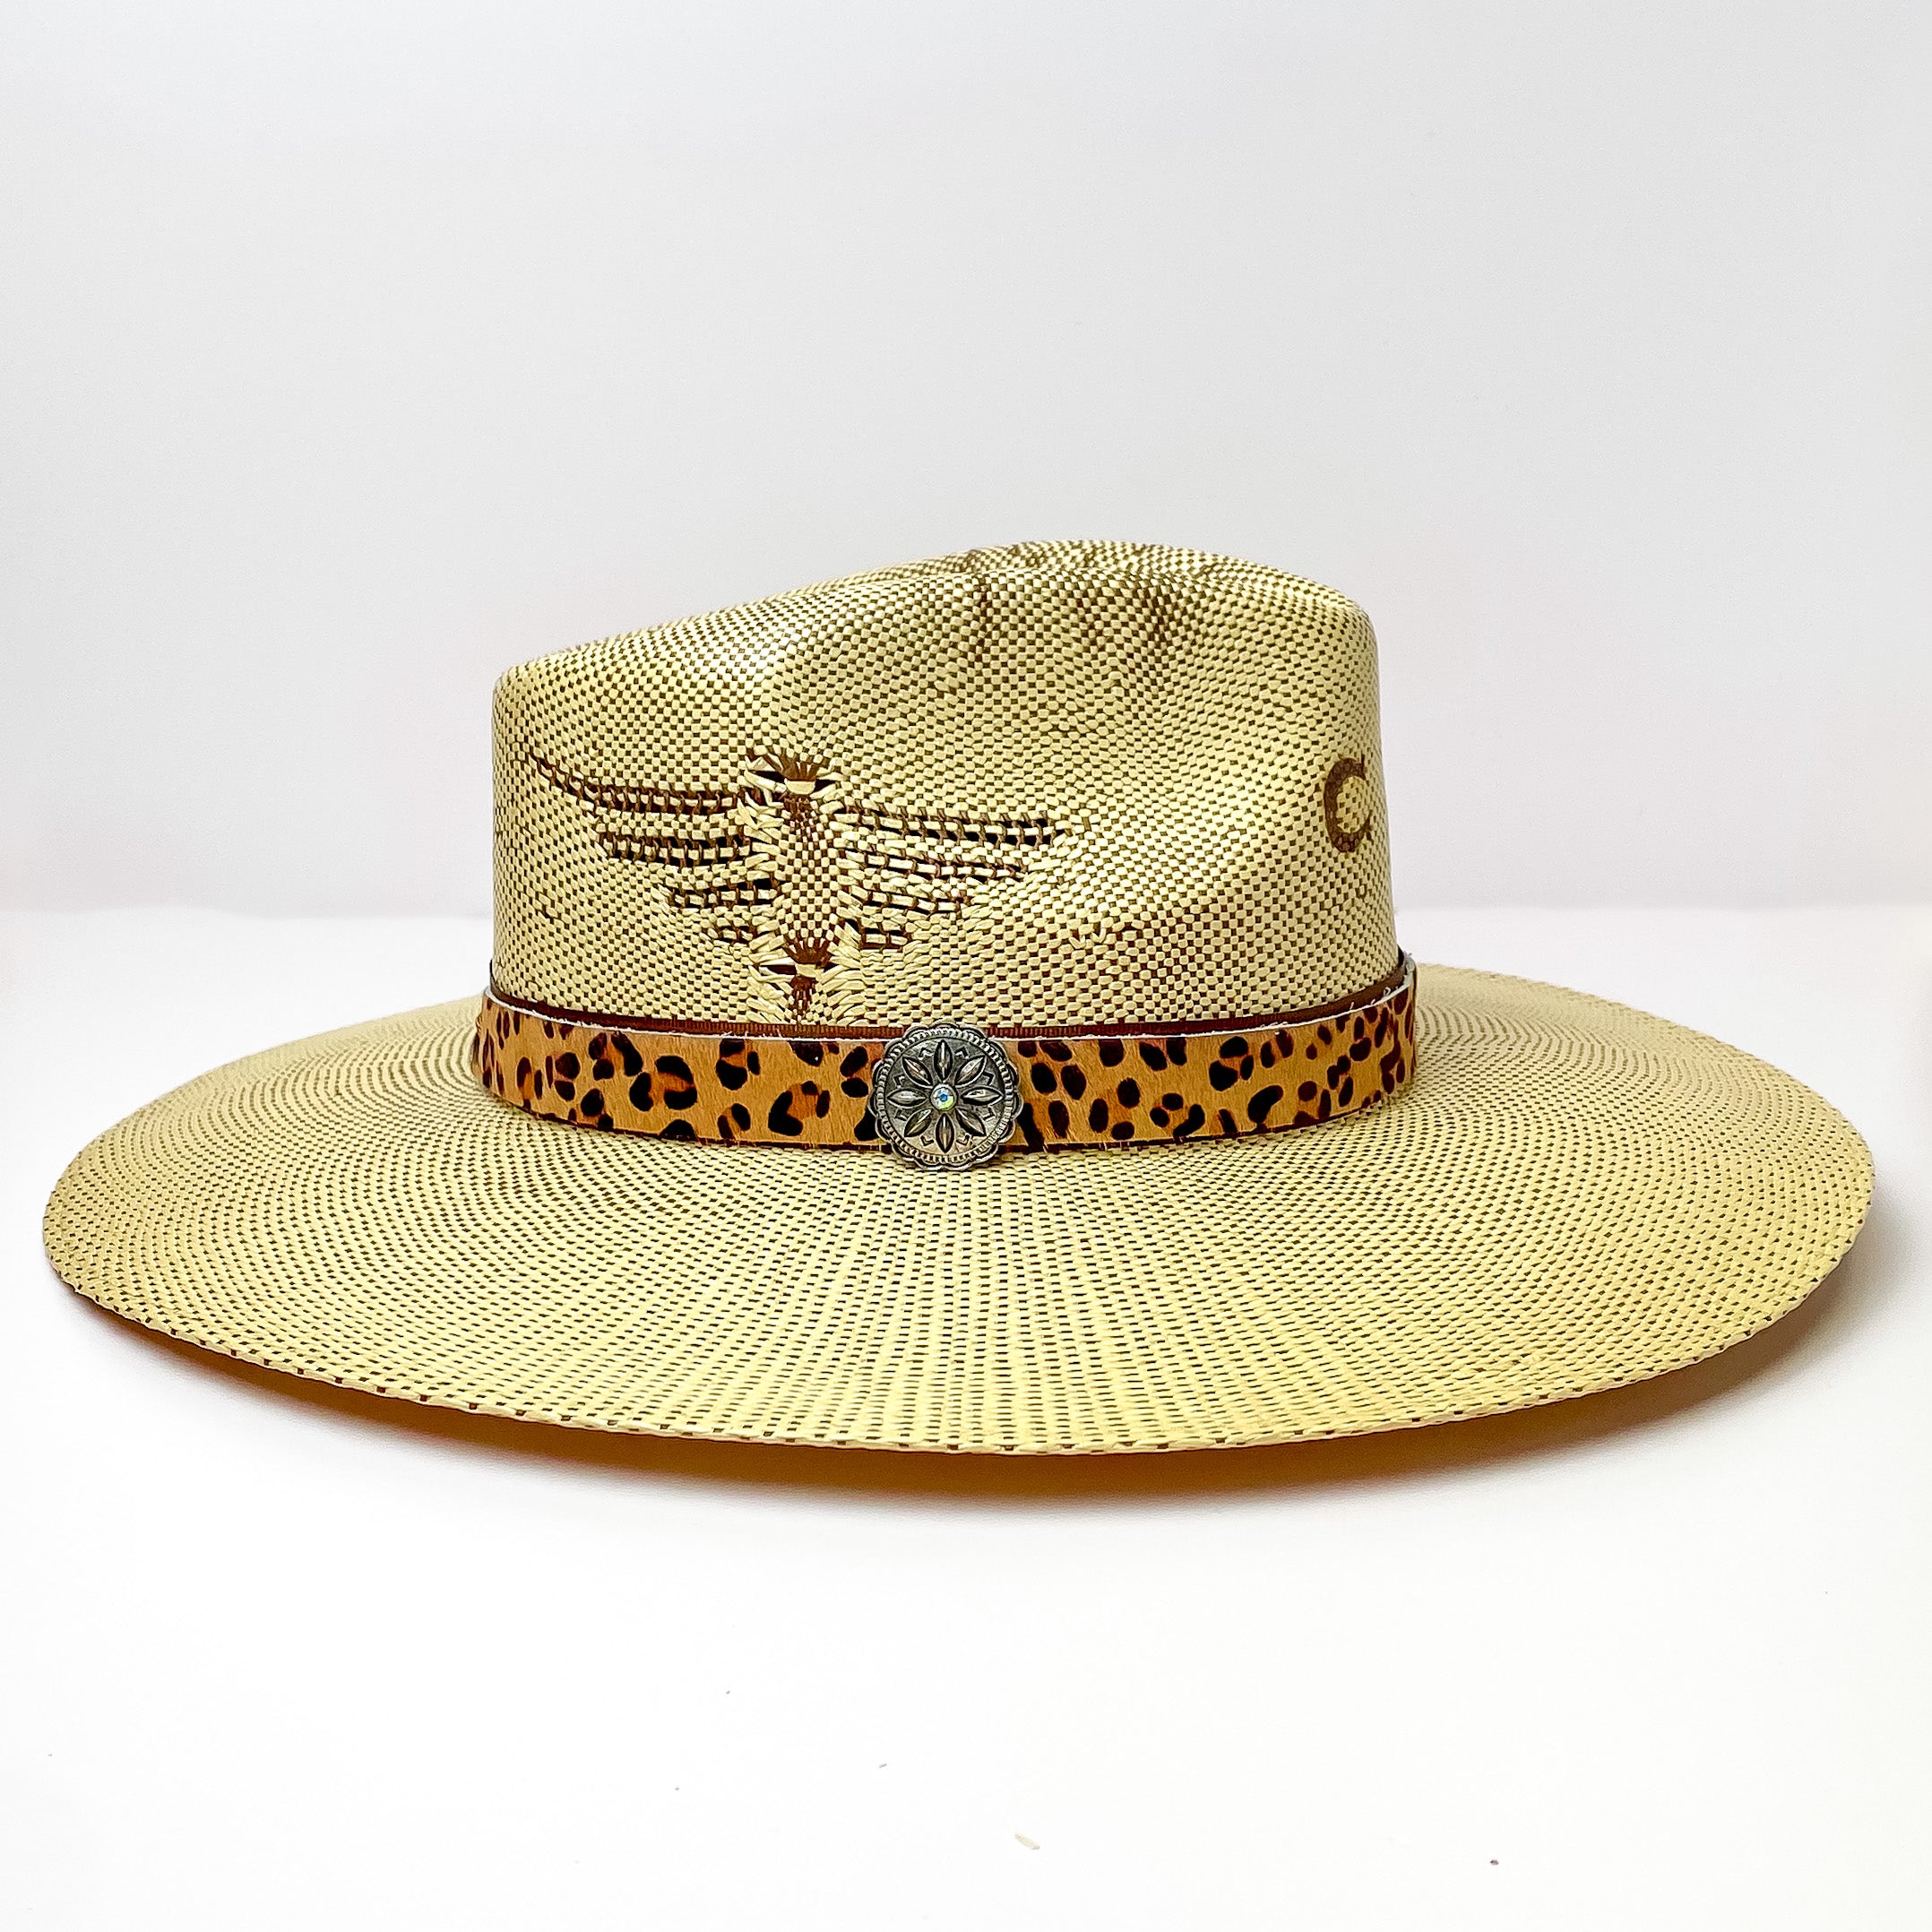 Leopard Print Hat Band with Silver Tone Concho Charm - Giddy Up Glamour Boutique